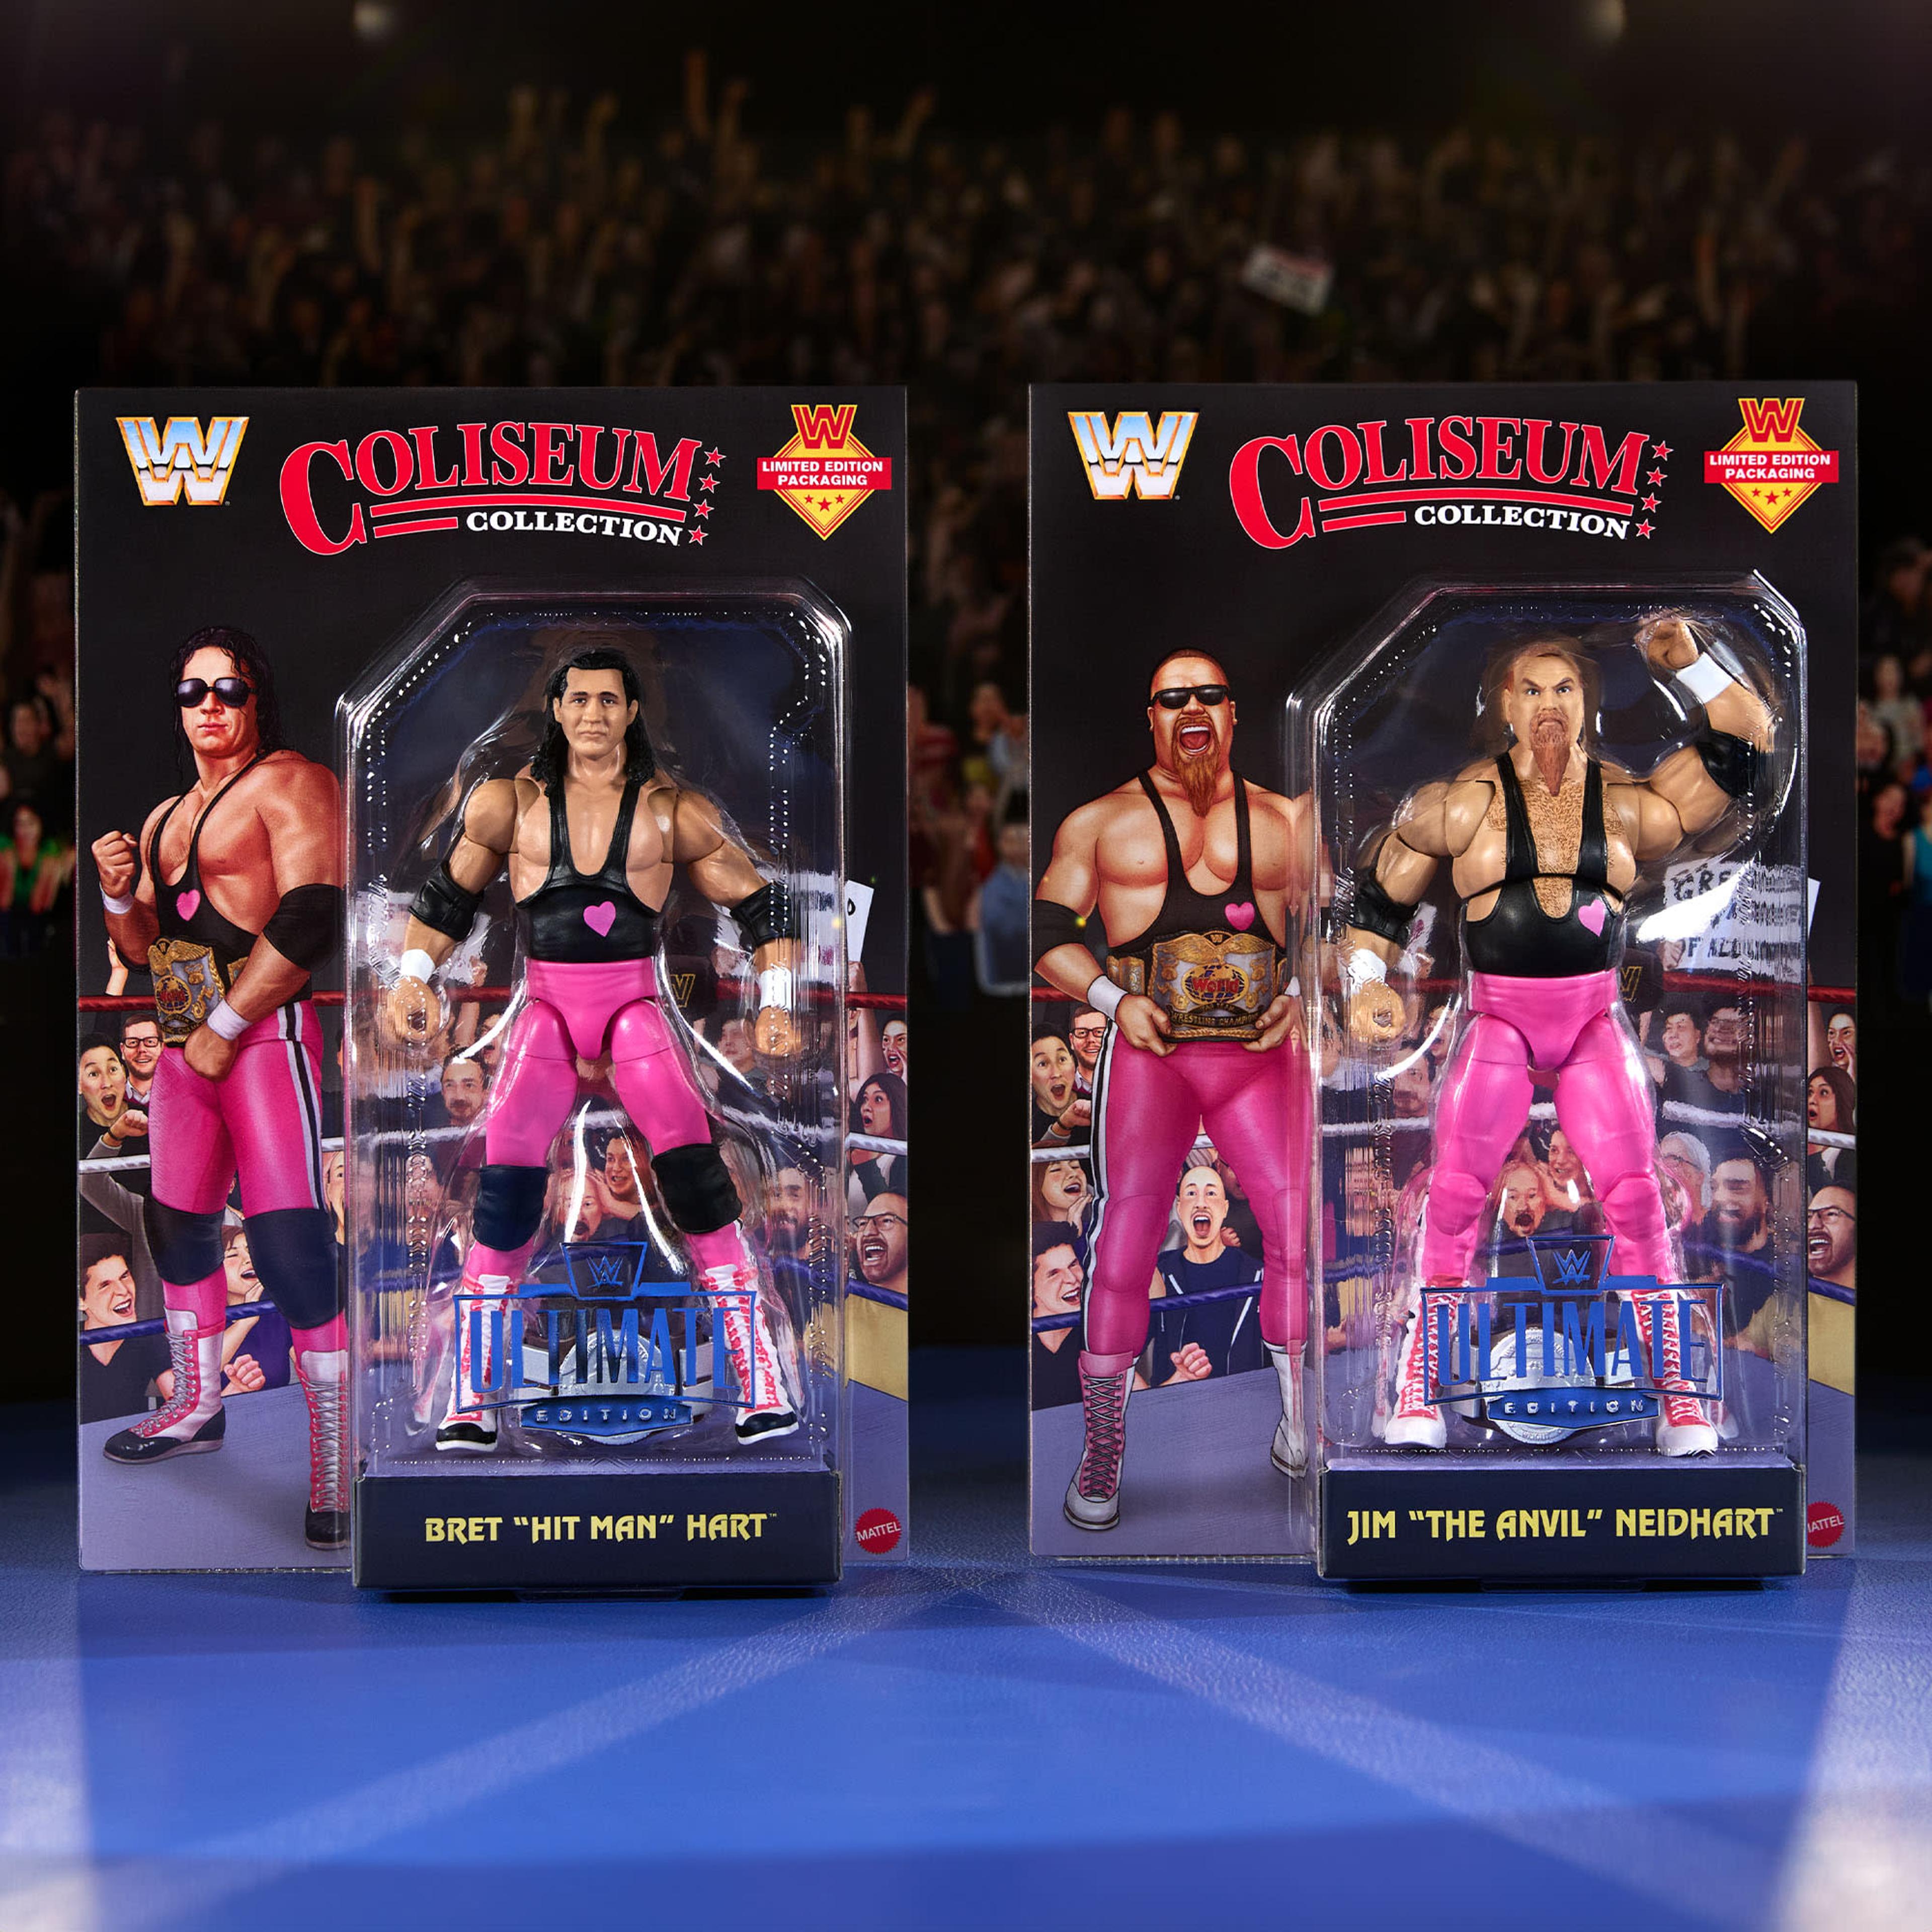 Alternate View 4 of WWE Coliseum Collection Hart Foundation Action Figure 2-Pack